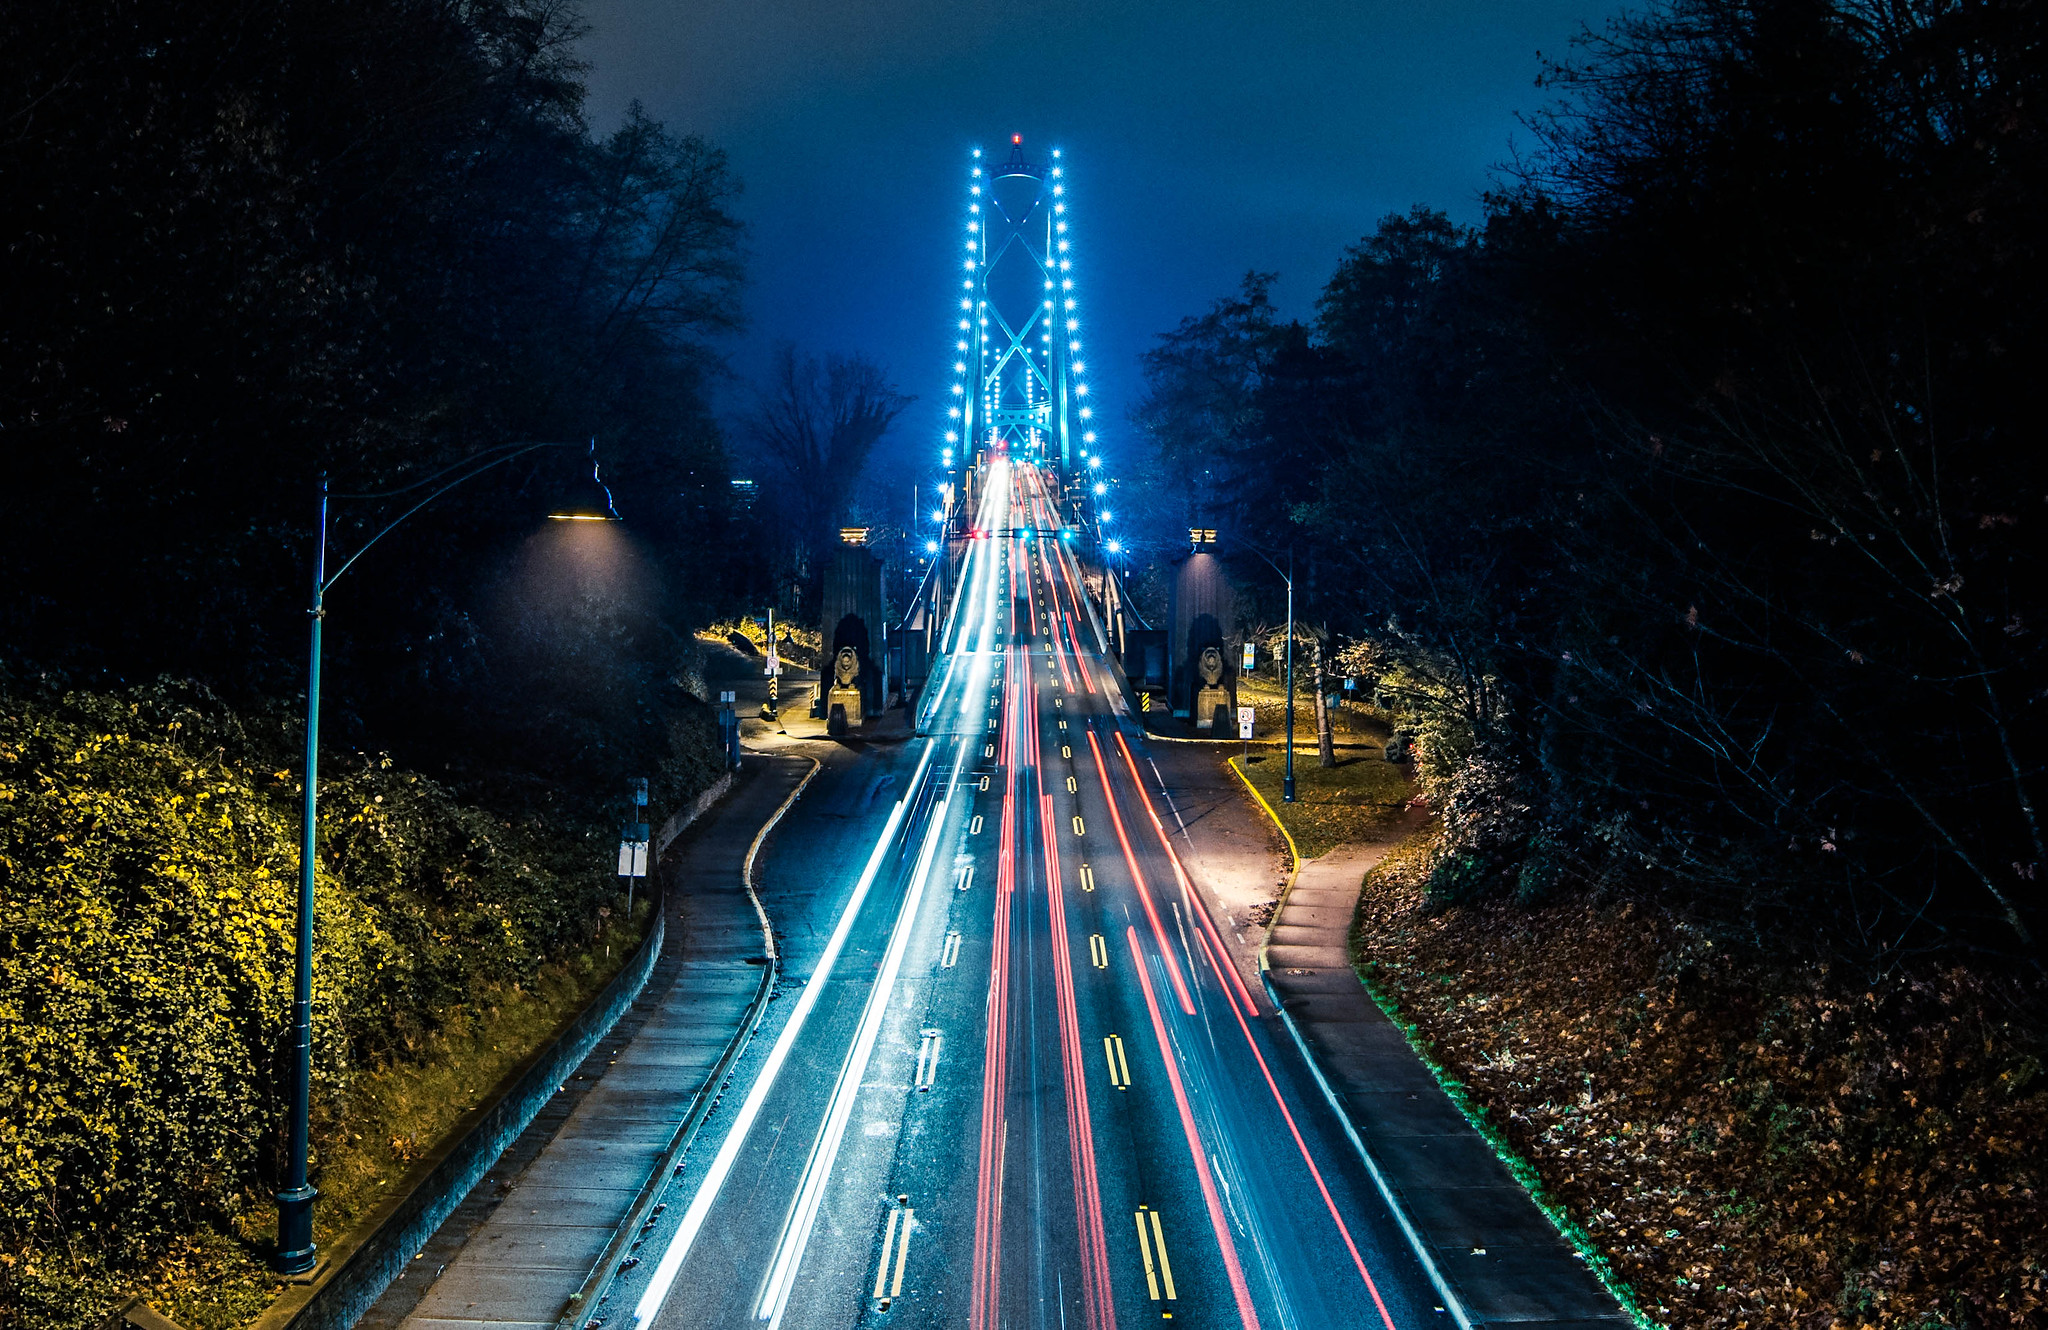 Traffic on Lion’s Gate Bridge (from timelapse movie) by Colin Knowles